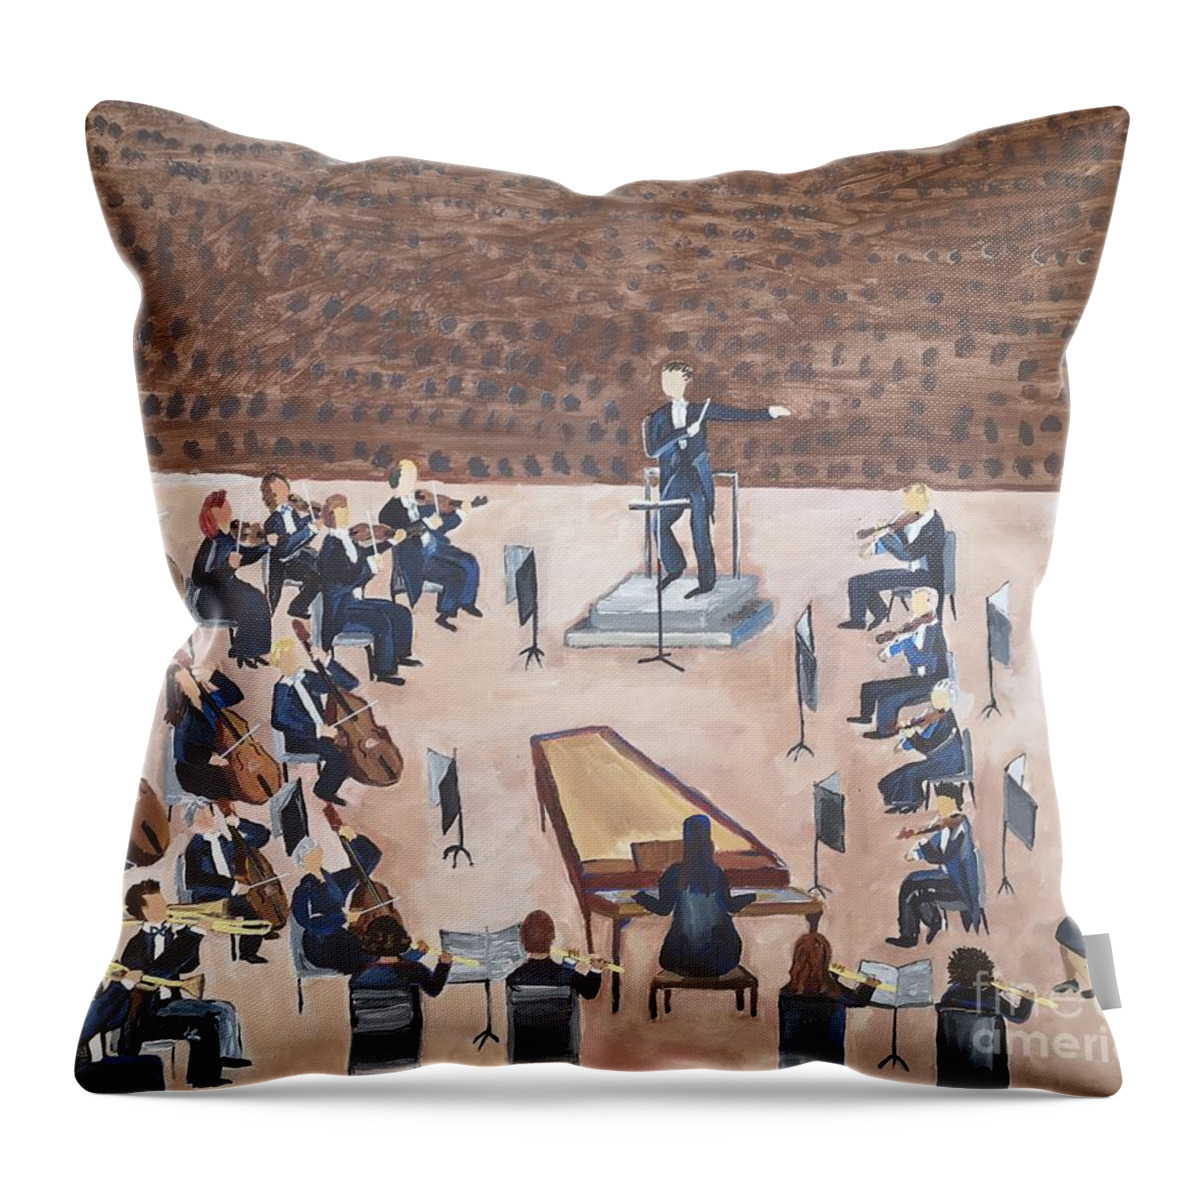 Messiah Throw Pillow featuring the painting Alexander's Messiah by Jennylynd James